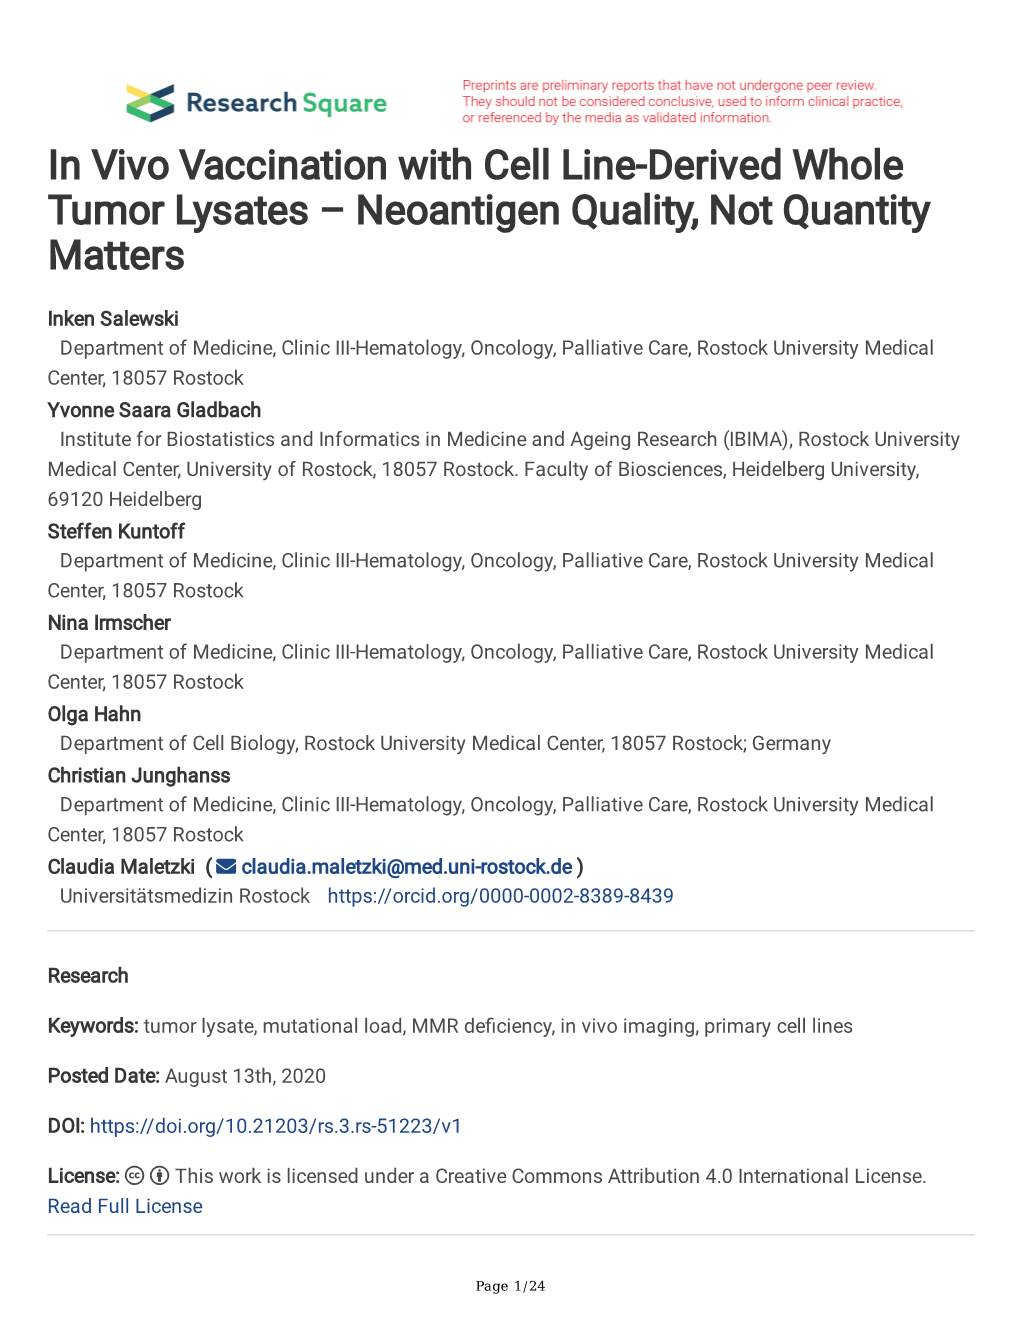 In Vivo Vaccination with Cell Line-Derived Whole Tumor Lysates – Neoantigen Quality, Not Quantity Matters